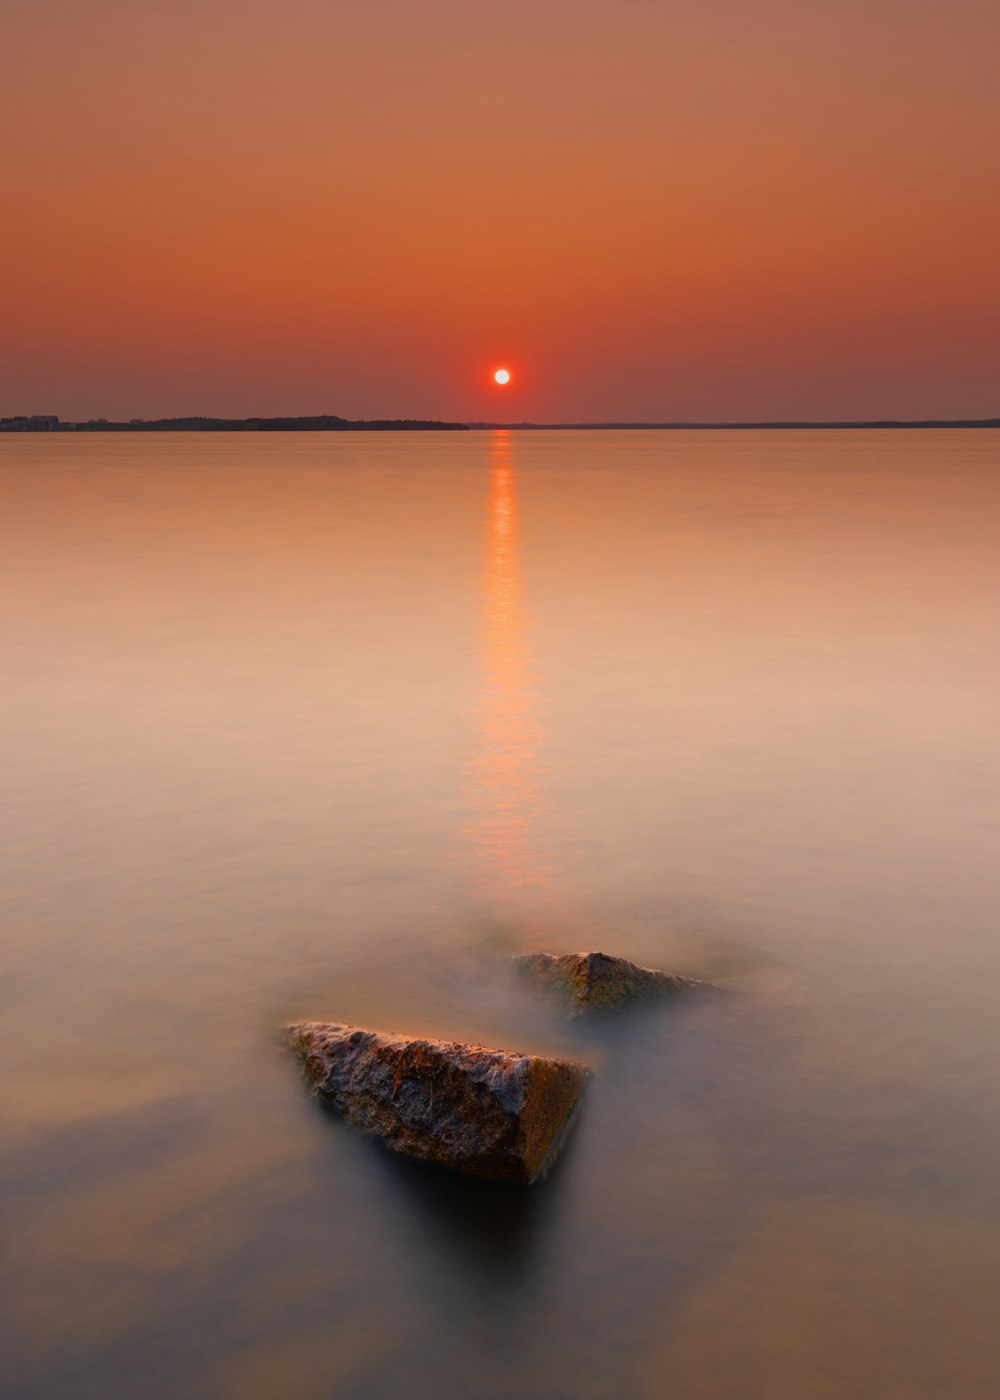 brown rock formation on body of water during sunset